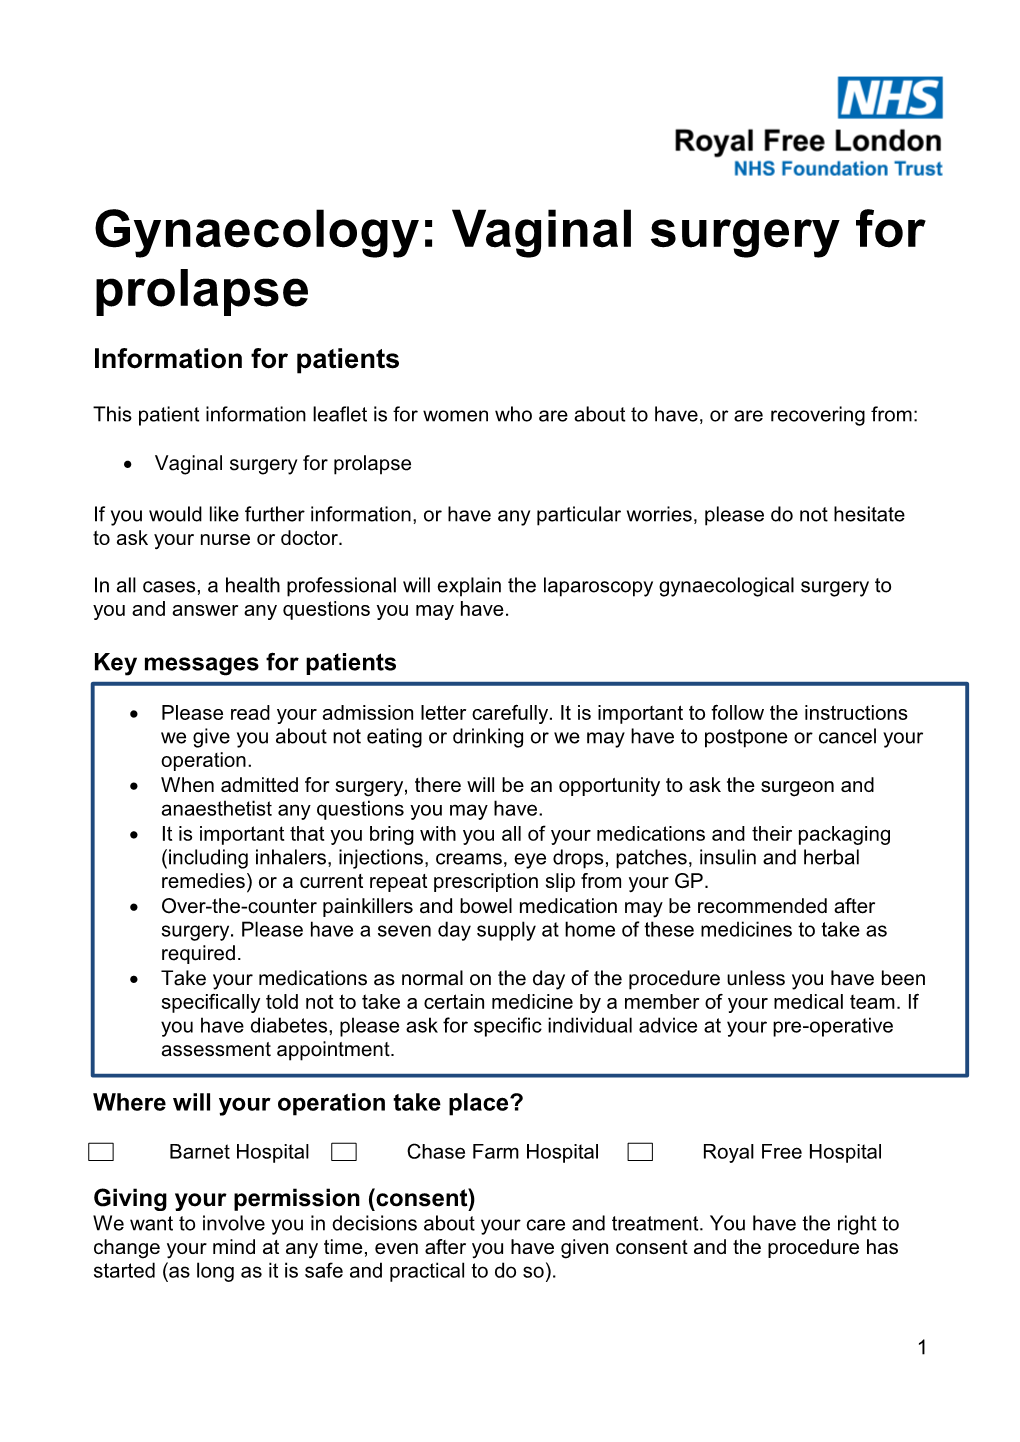 Gynaecology: Vaginal Surgery for Prolapse